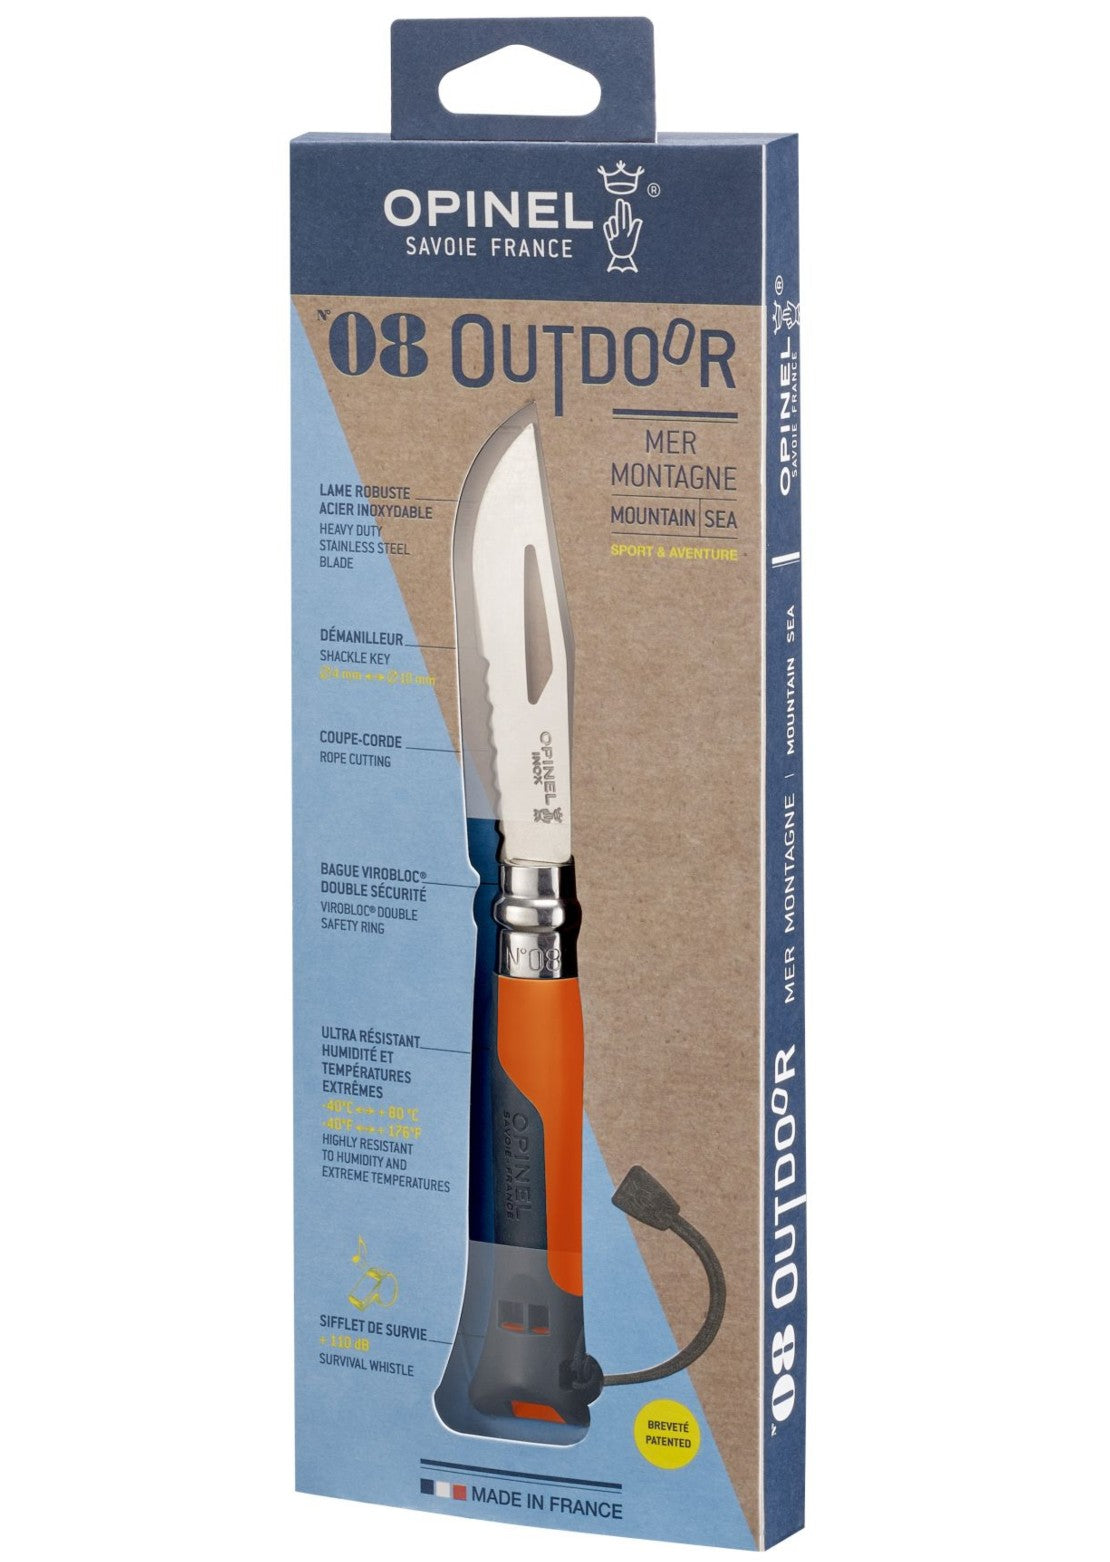 Opinel Tradition Multifunction N°08 Outdoor Sports Knife